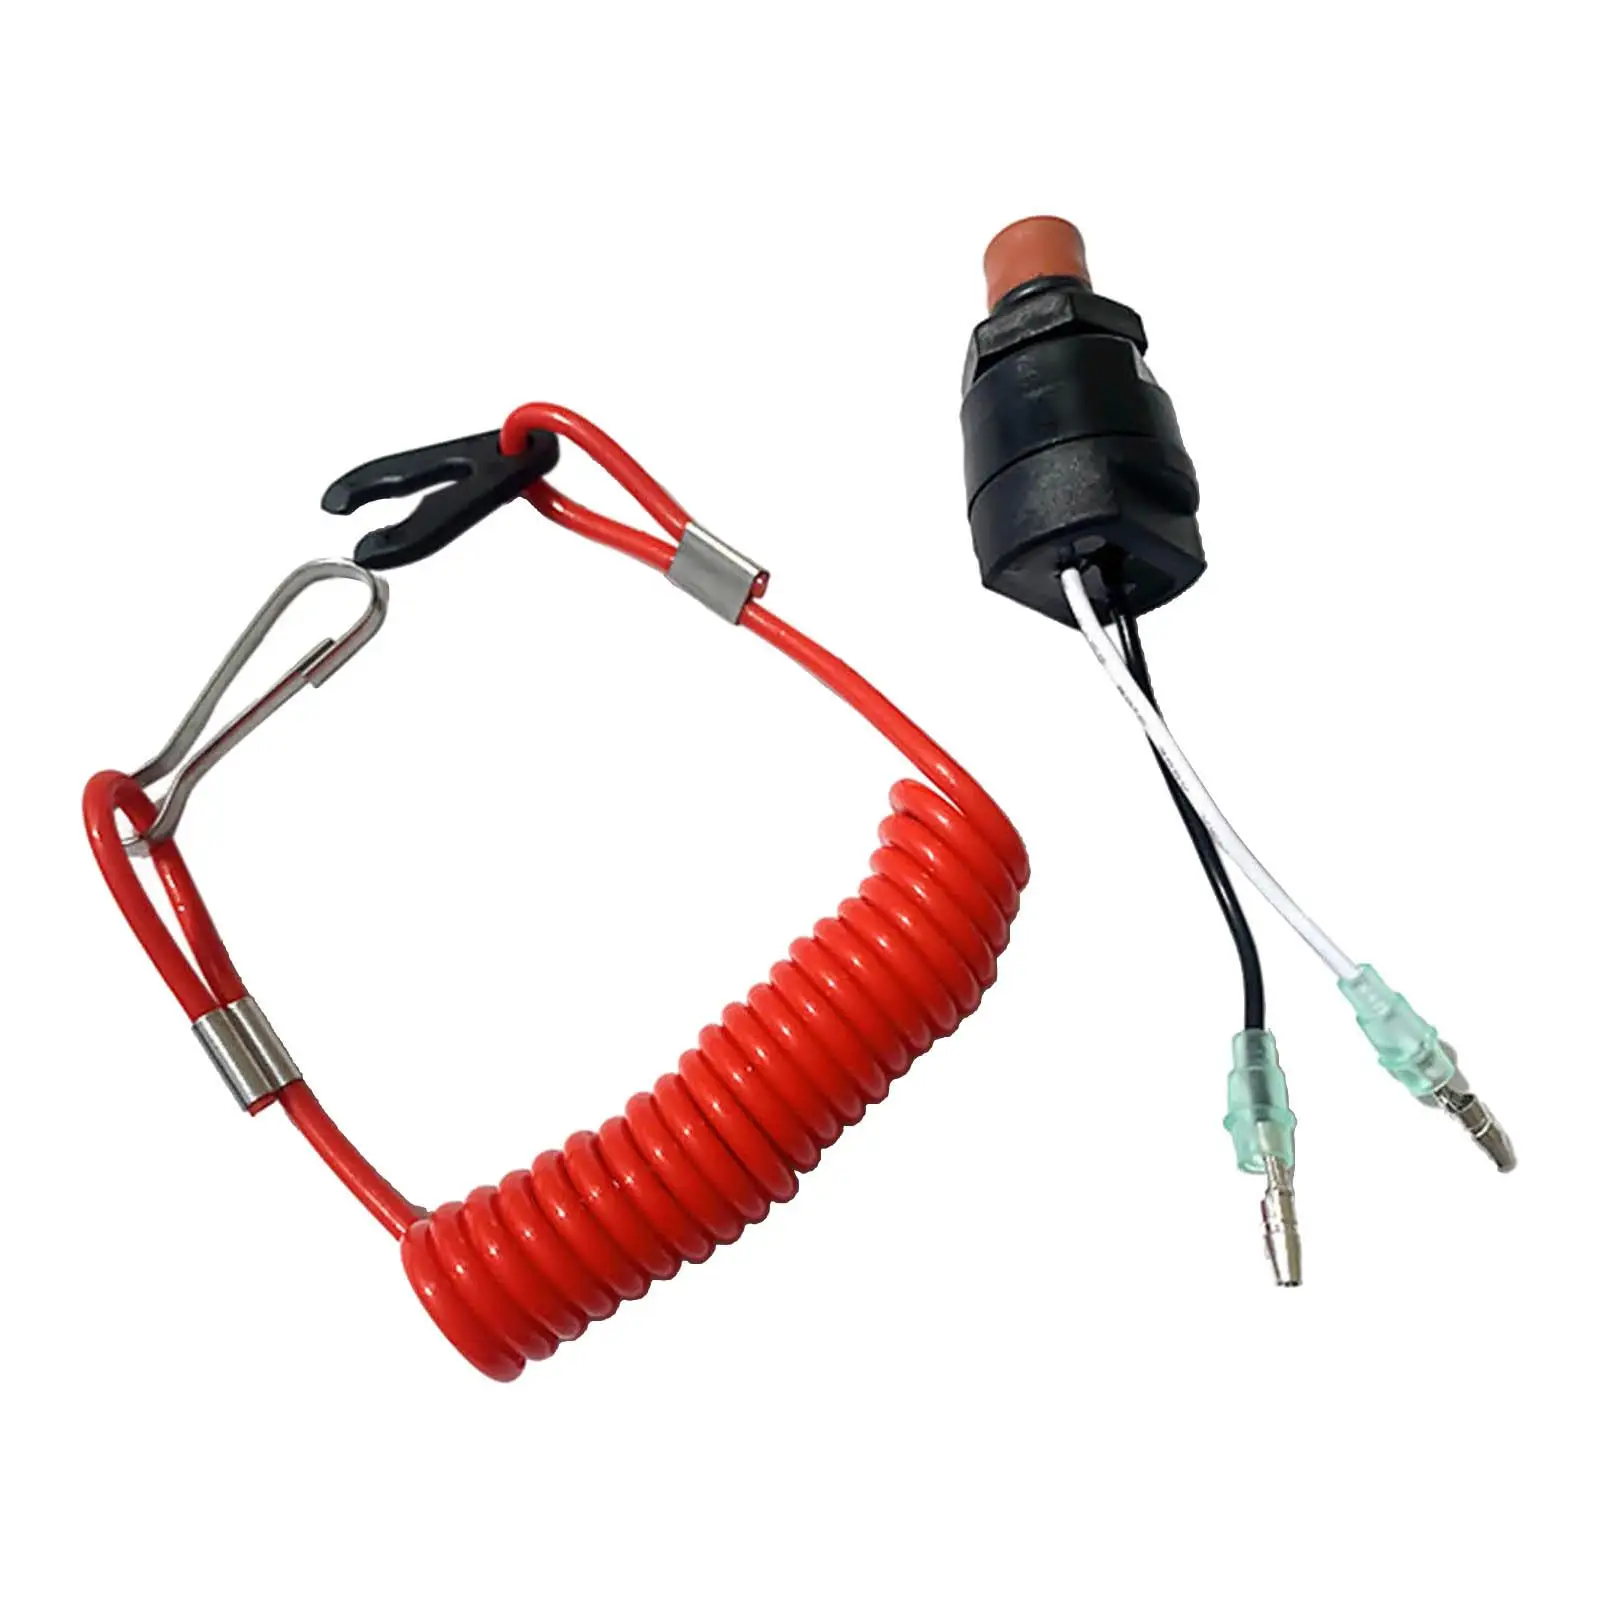 Boat Outboard Motor Emergency Kill Stop Switch W/Tether Lanyard Urgent Stop